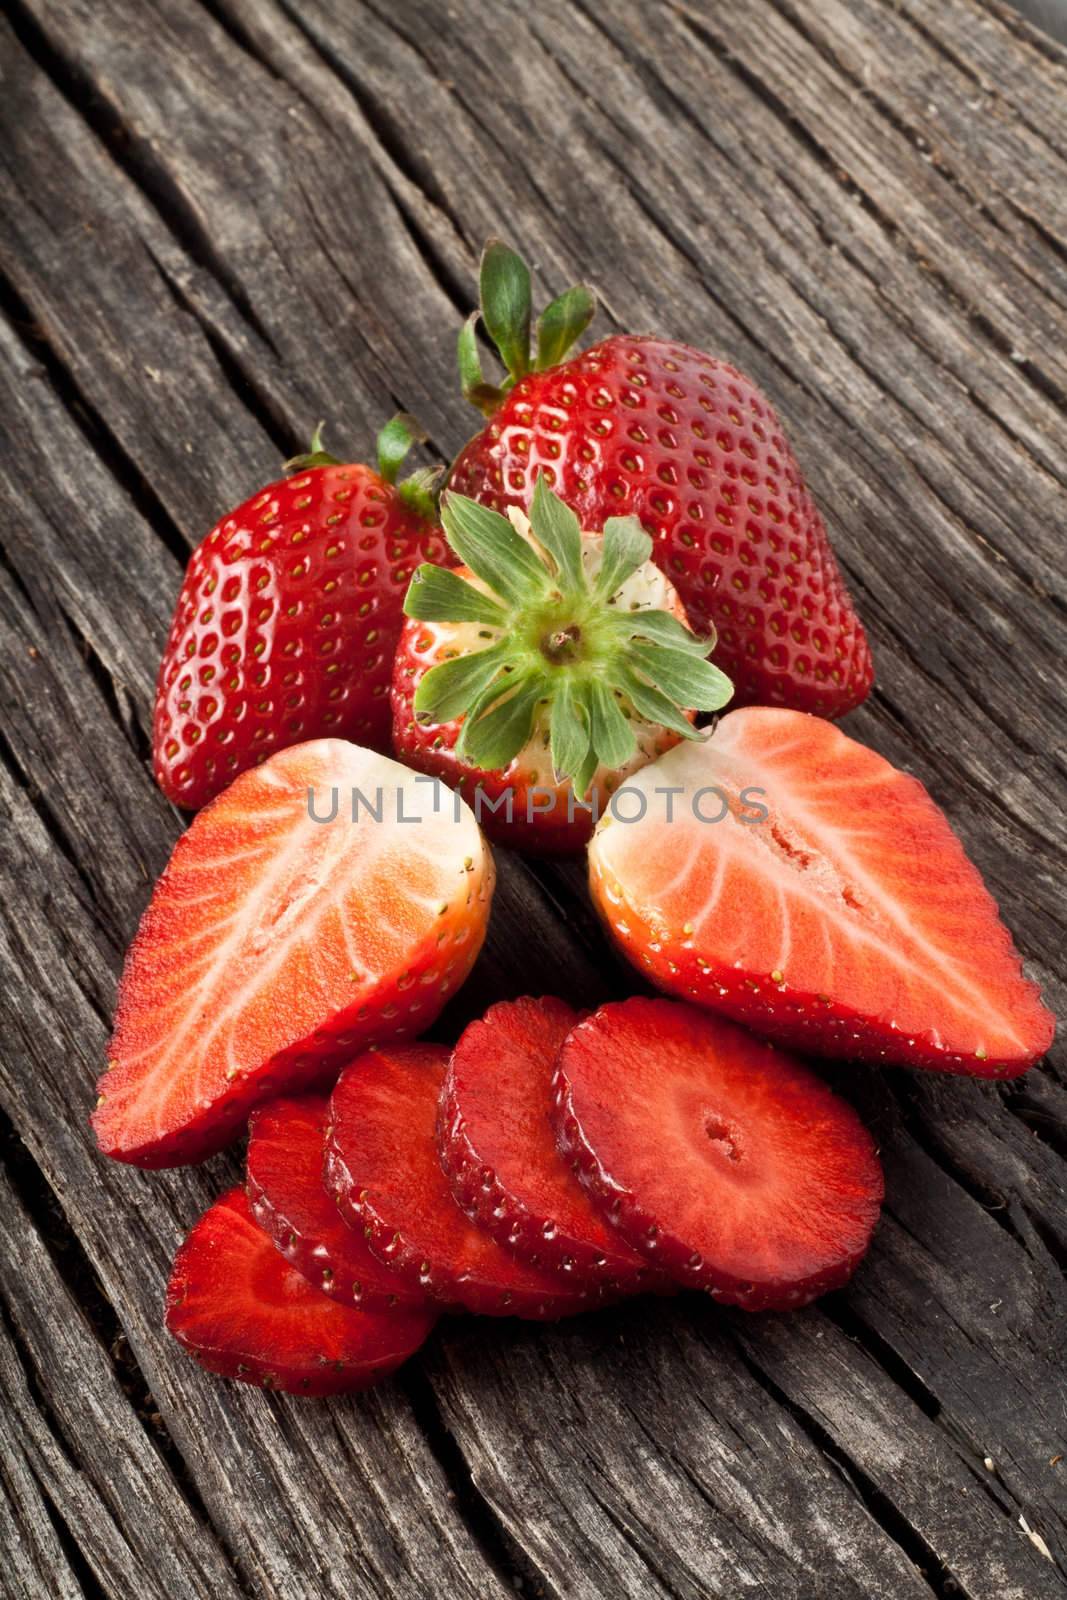 strawberry by maxg71